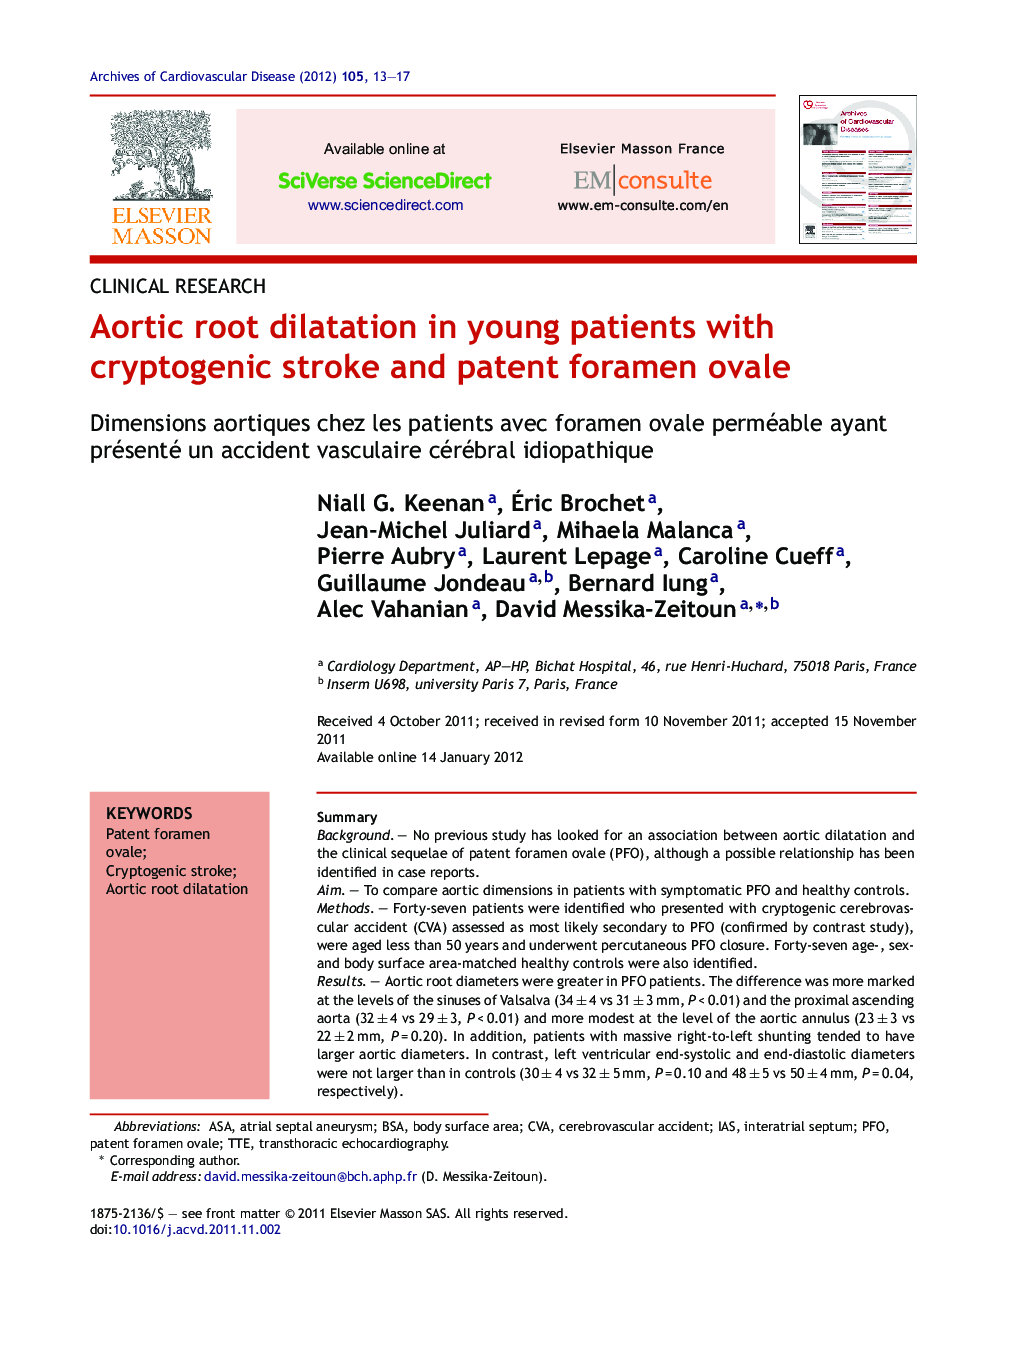 Aortic root dilatation in young patients with cryptogenic stroke and patent foramen ovale